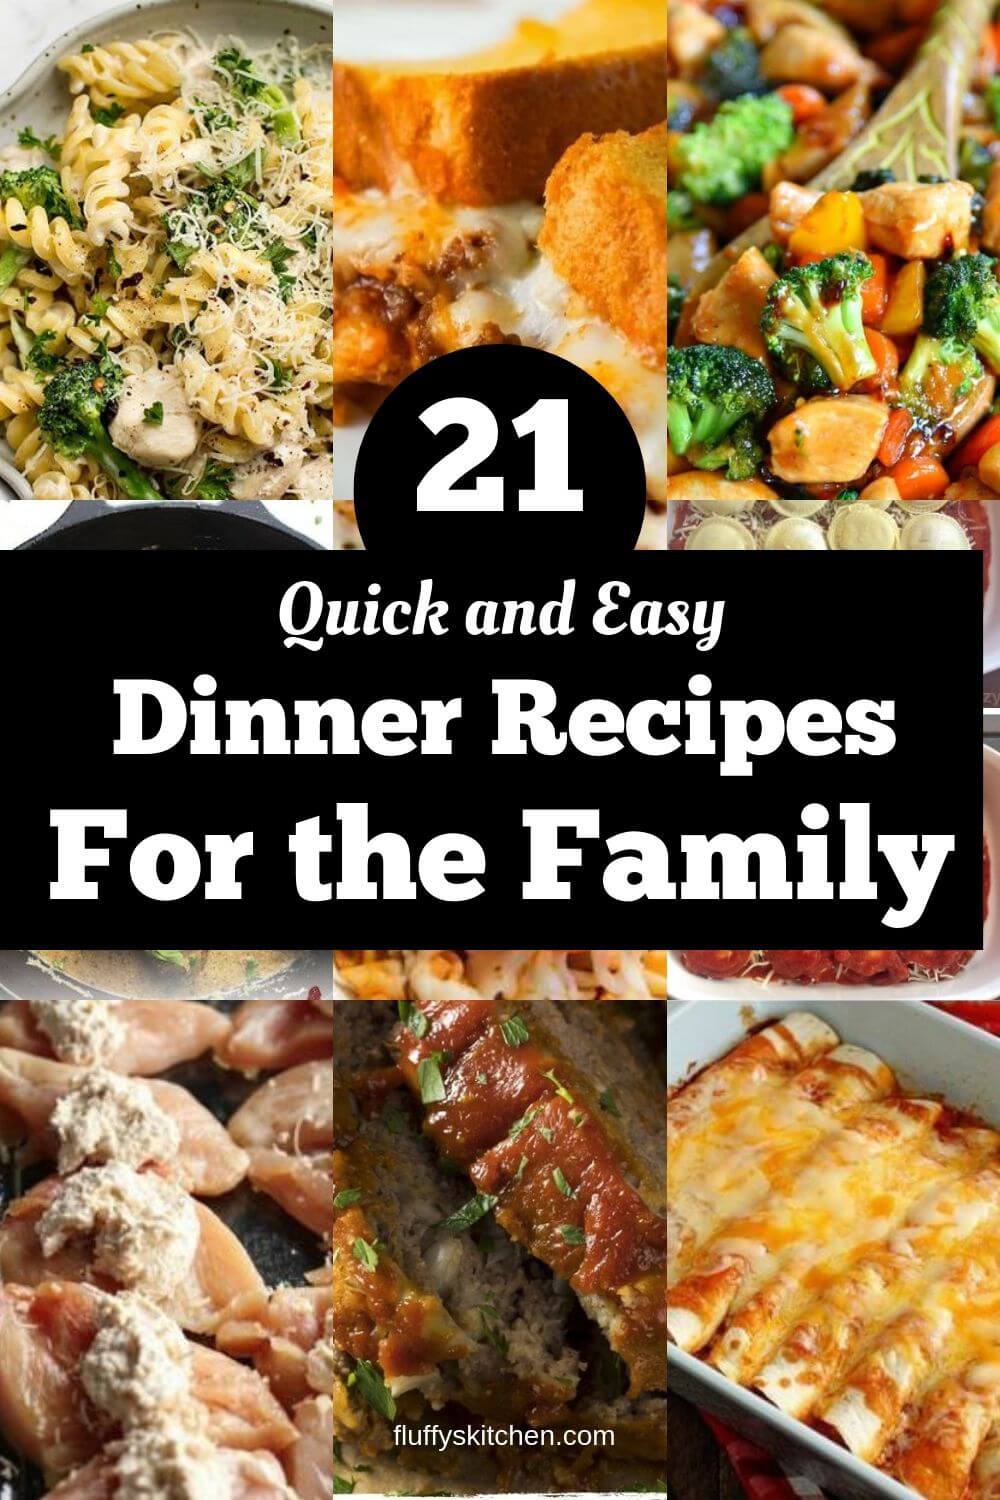 21 Quick and Easy Dinner Recipes for the Family - Fluffy's Kitchen